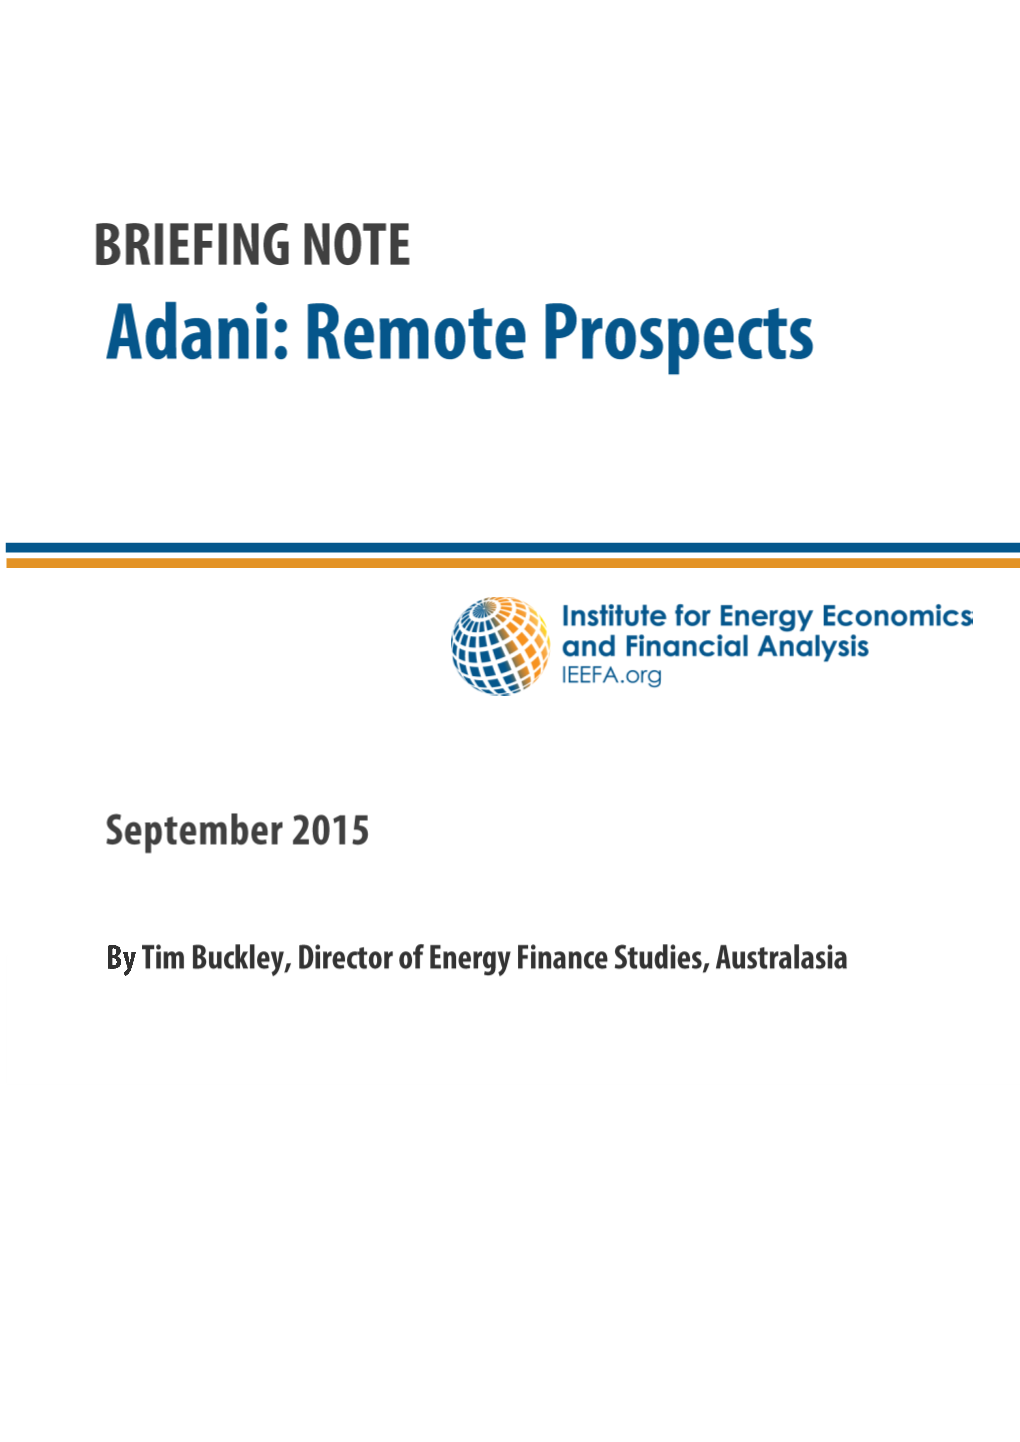 In November 2013 IEEFA Released a Review of the Adani Group's Proposed Coal Mine